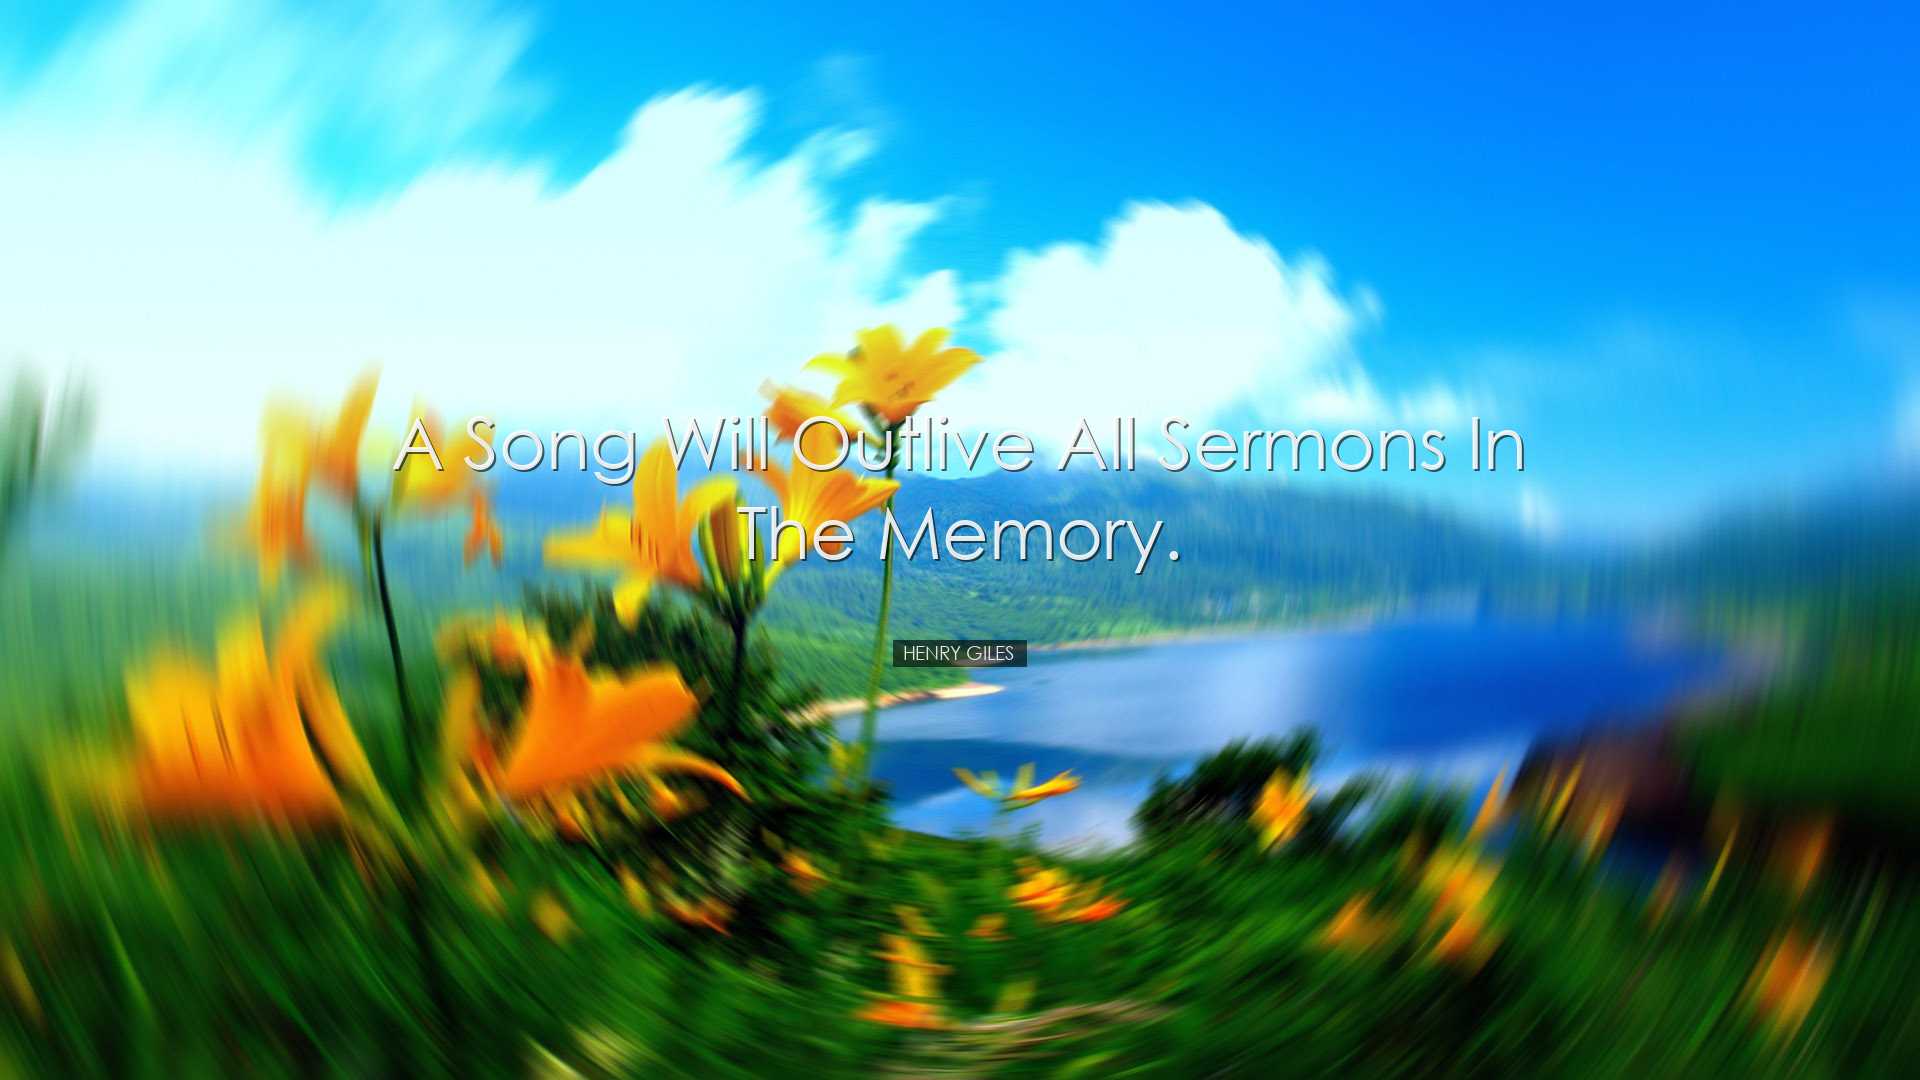 A song will outlive all sermons in the memory. - Henry Giles